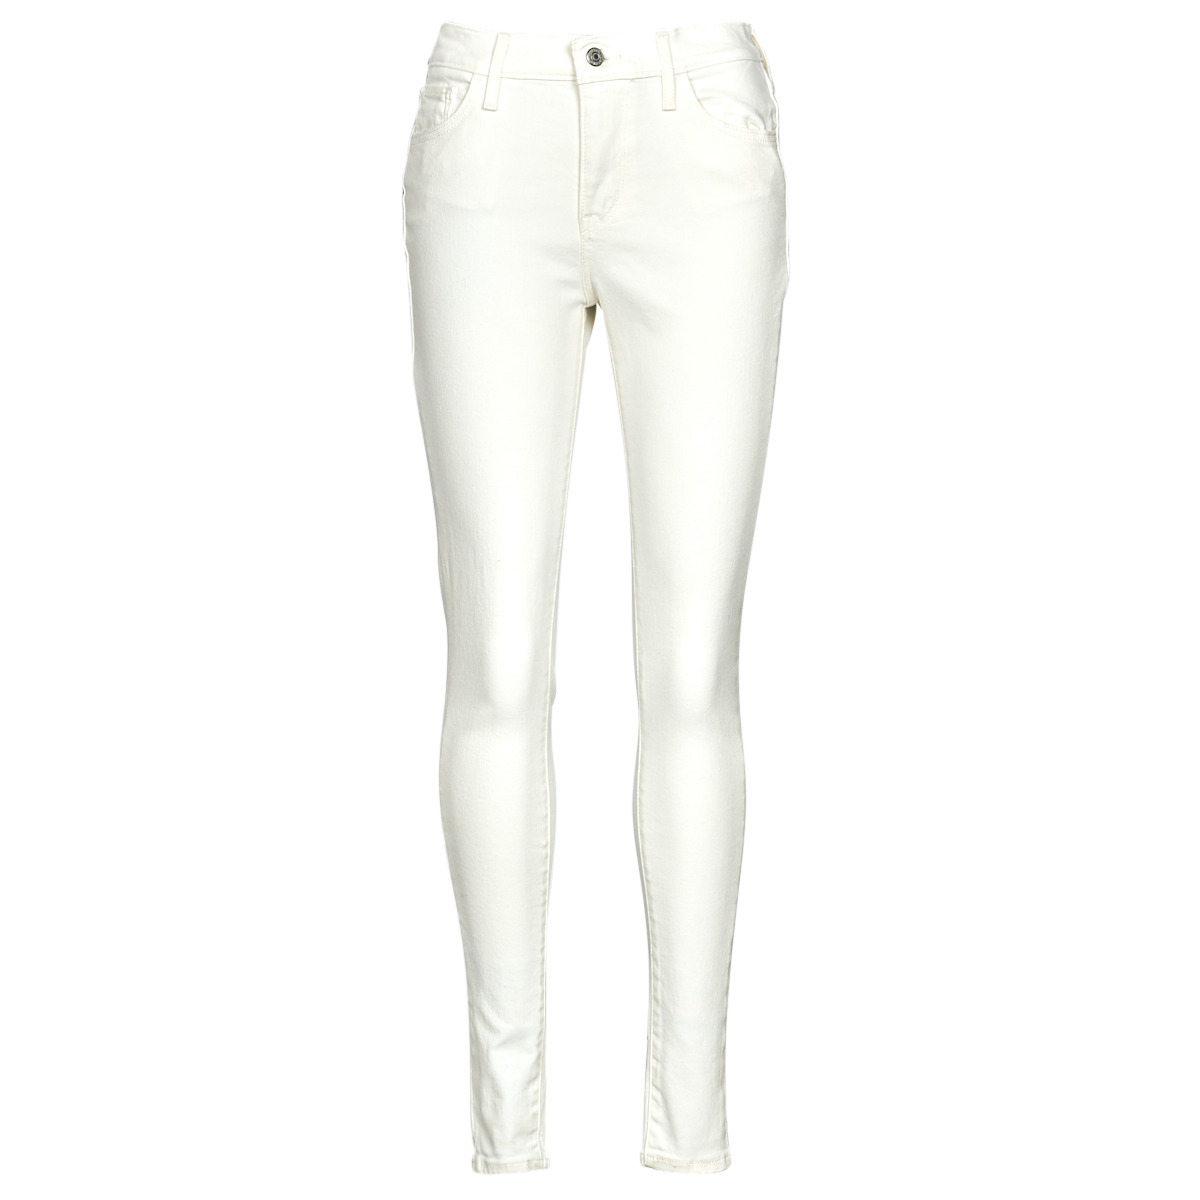 Levi's Woman Skinny Jeans in White - Spartoo GOOFASH